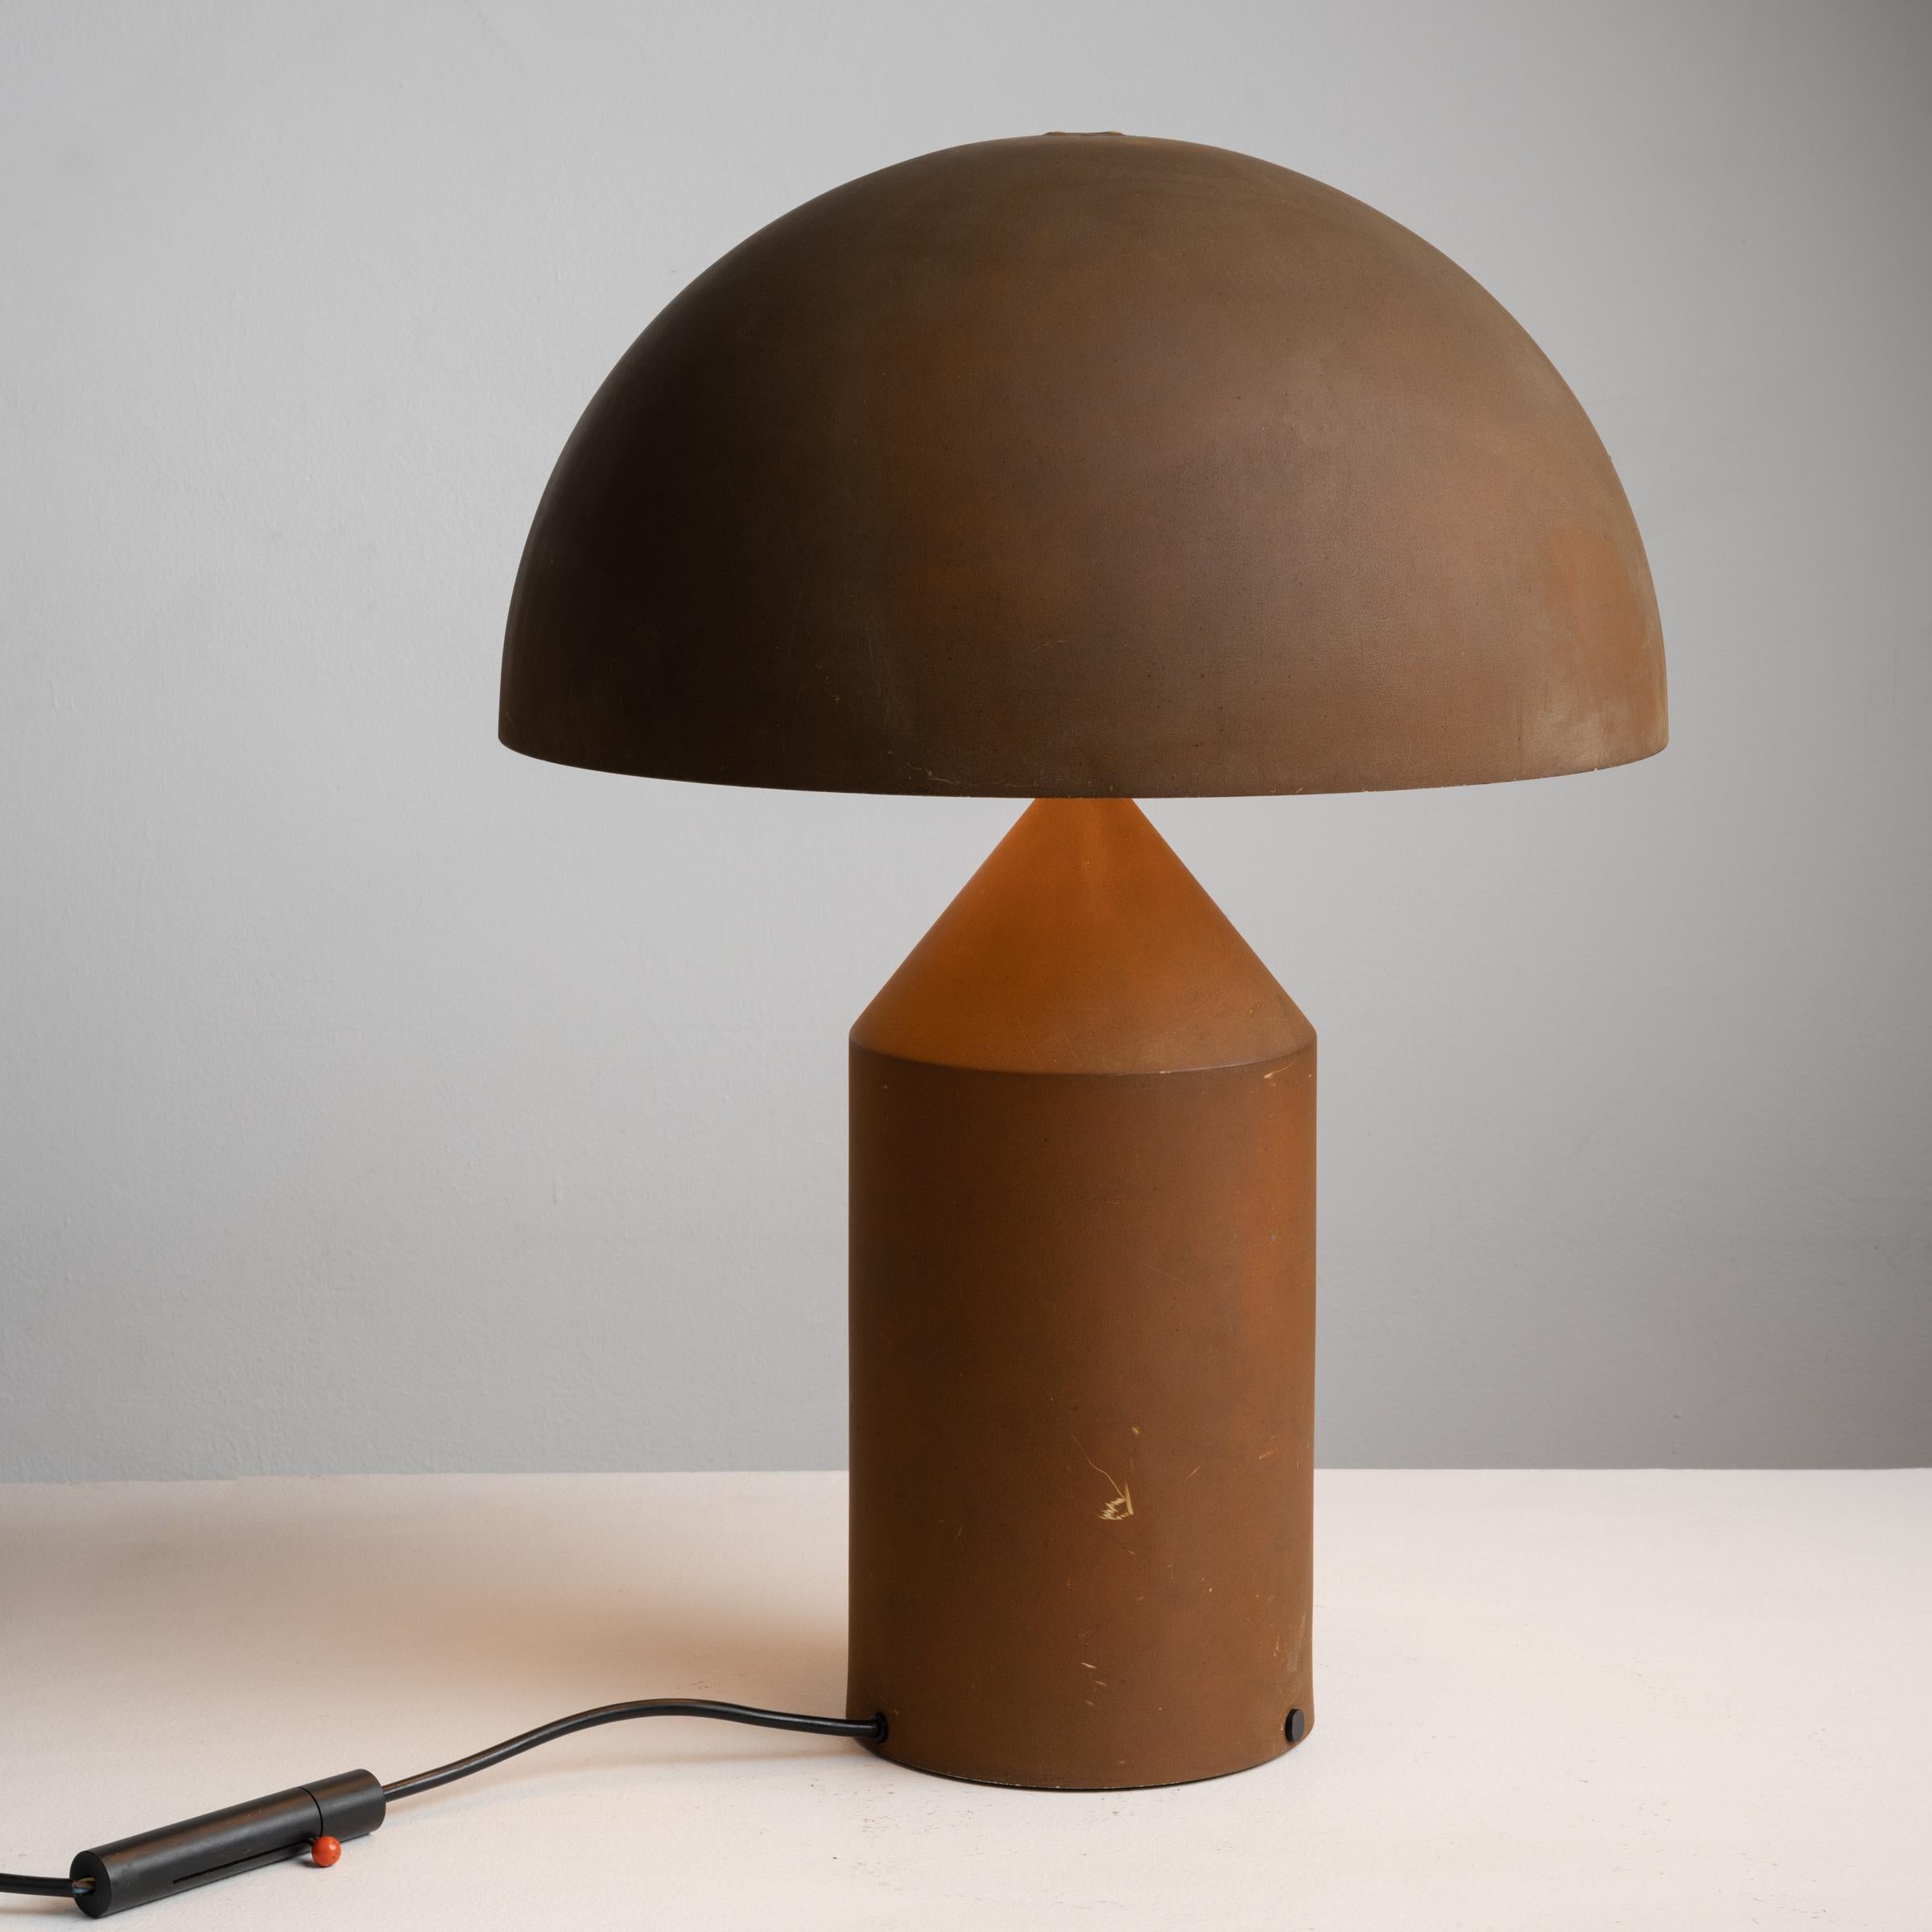 Enameled Atollo 239 Table Lamp by Vico Magistretti for Oluce